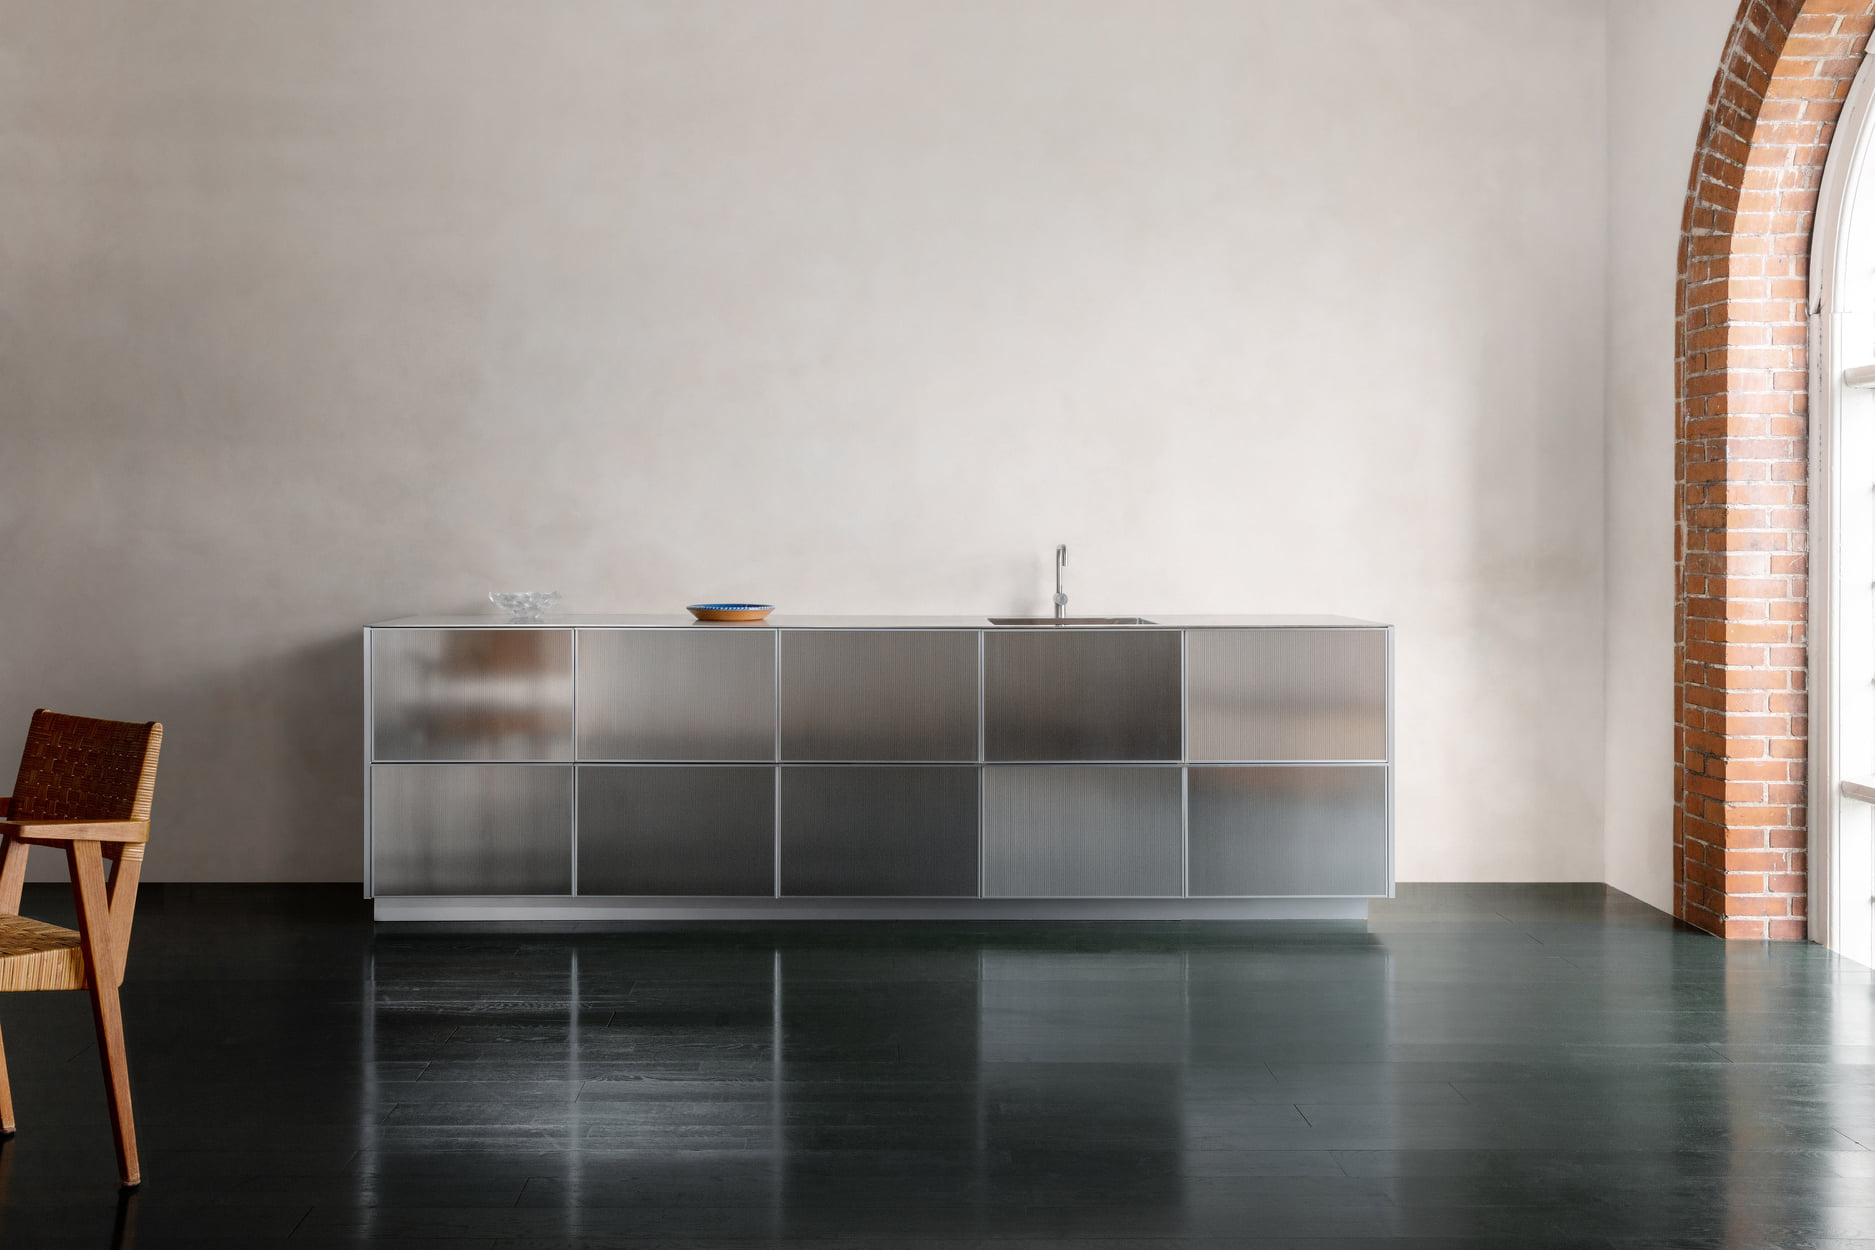 reform launches two new designer kitchen cabinet lines